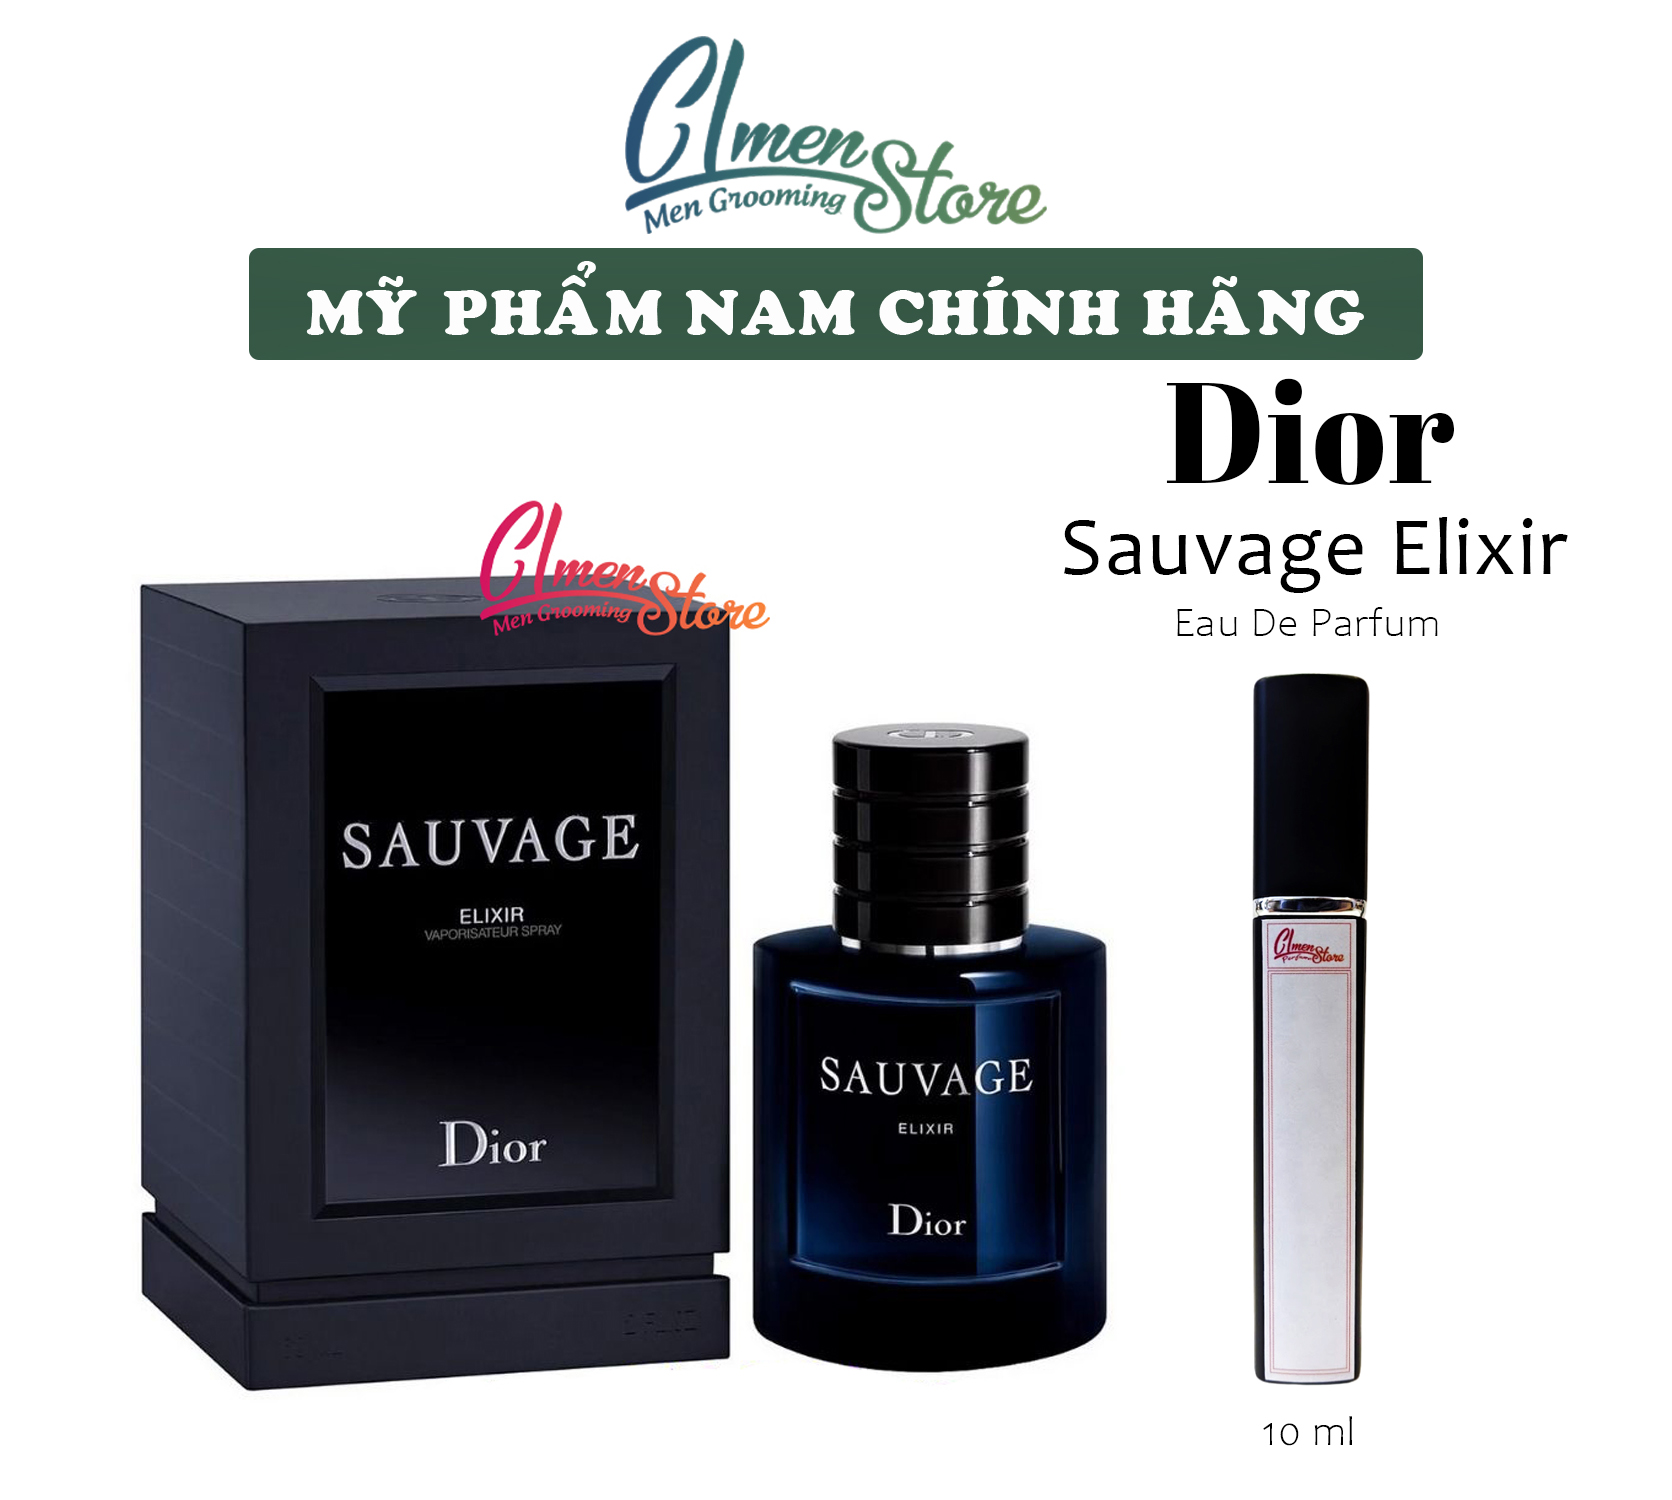 Chiết Dior Sauvage Elixir 10ml  Thelook17